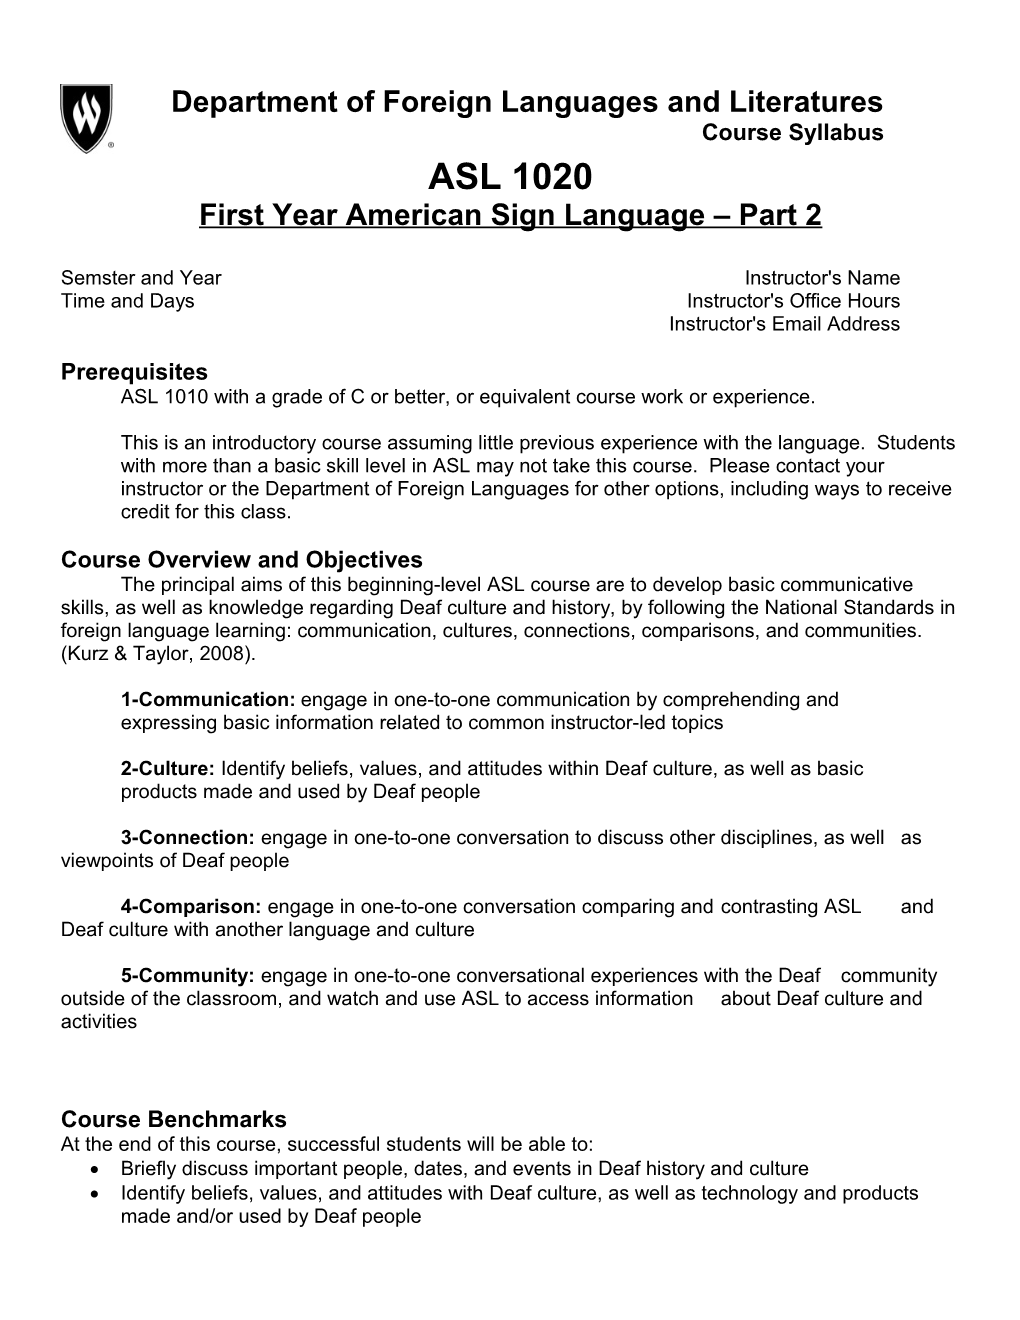 First Year American Sign Language Part 2